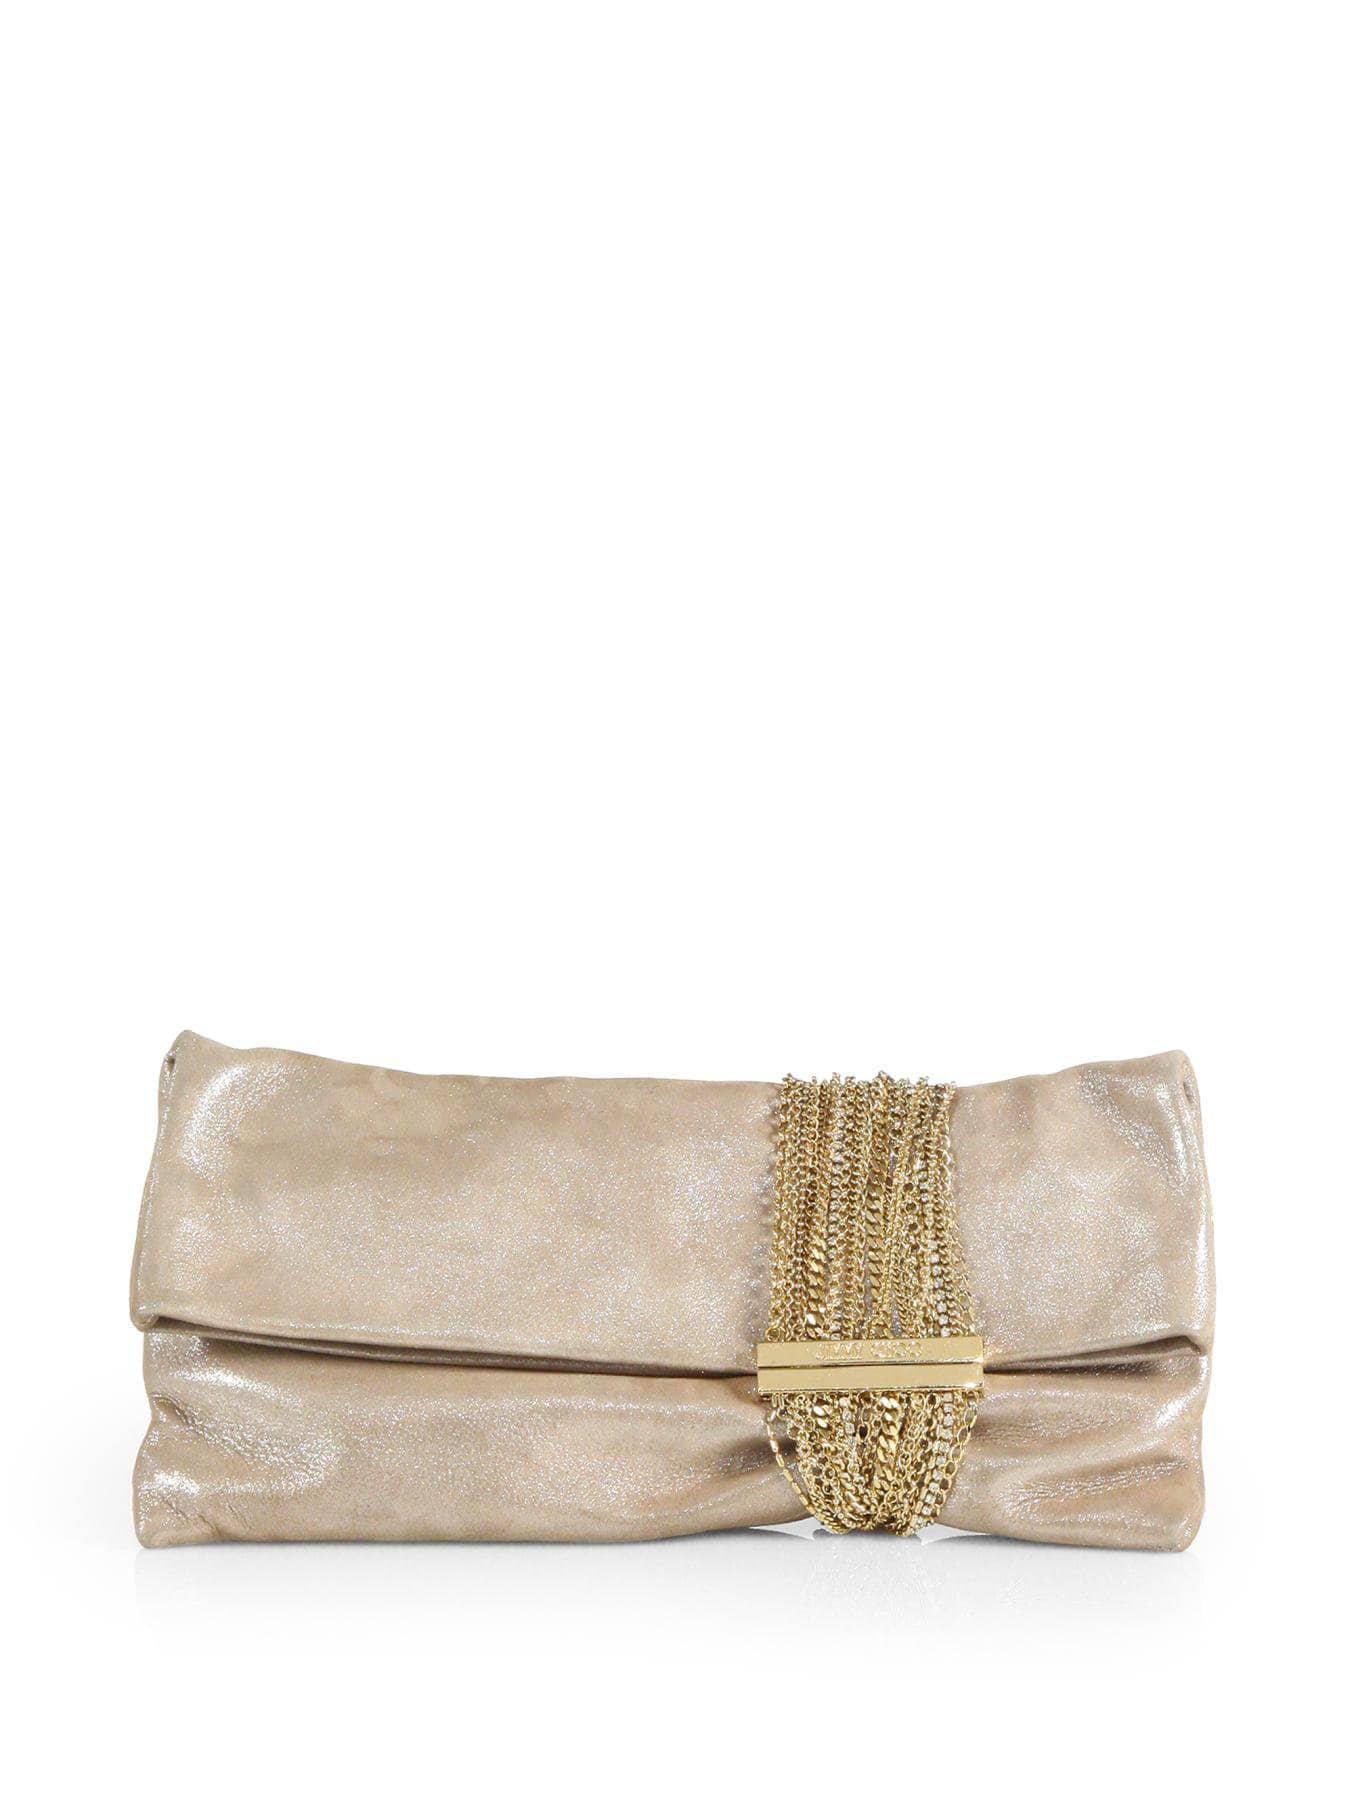 Jimmy Choo Chandra Shimmer Suede Chain Clutch in Natural | Lyst